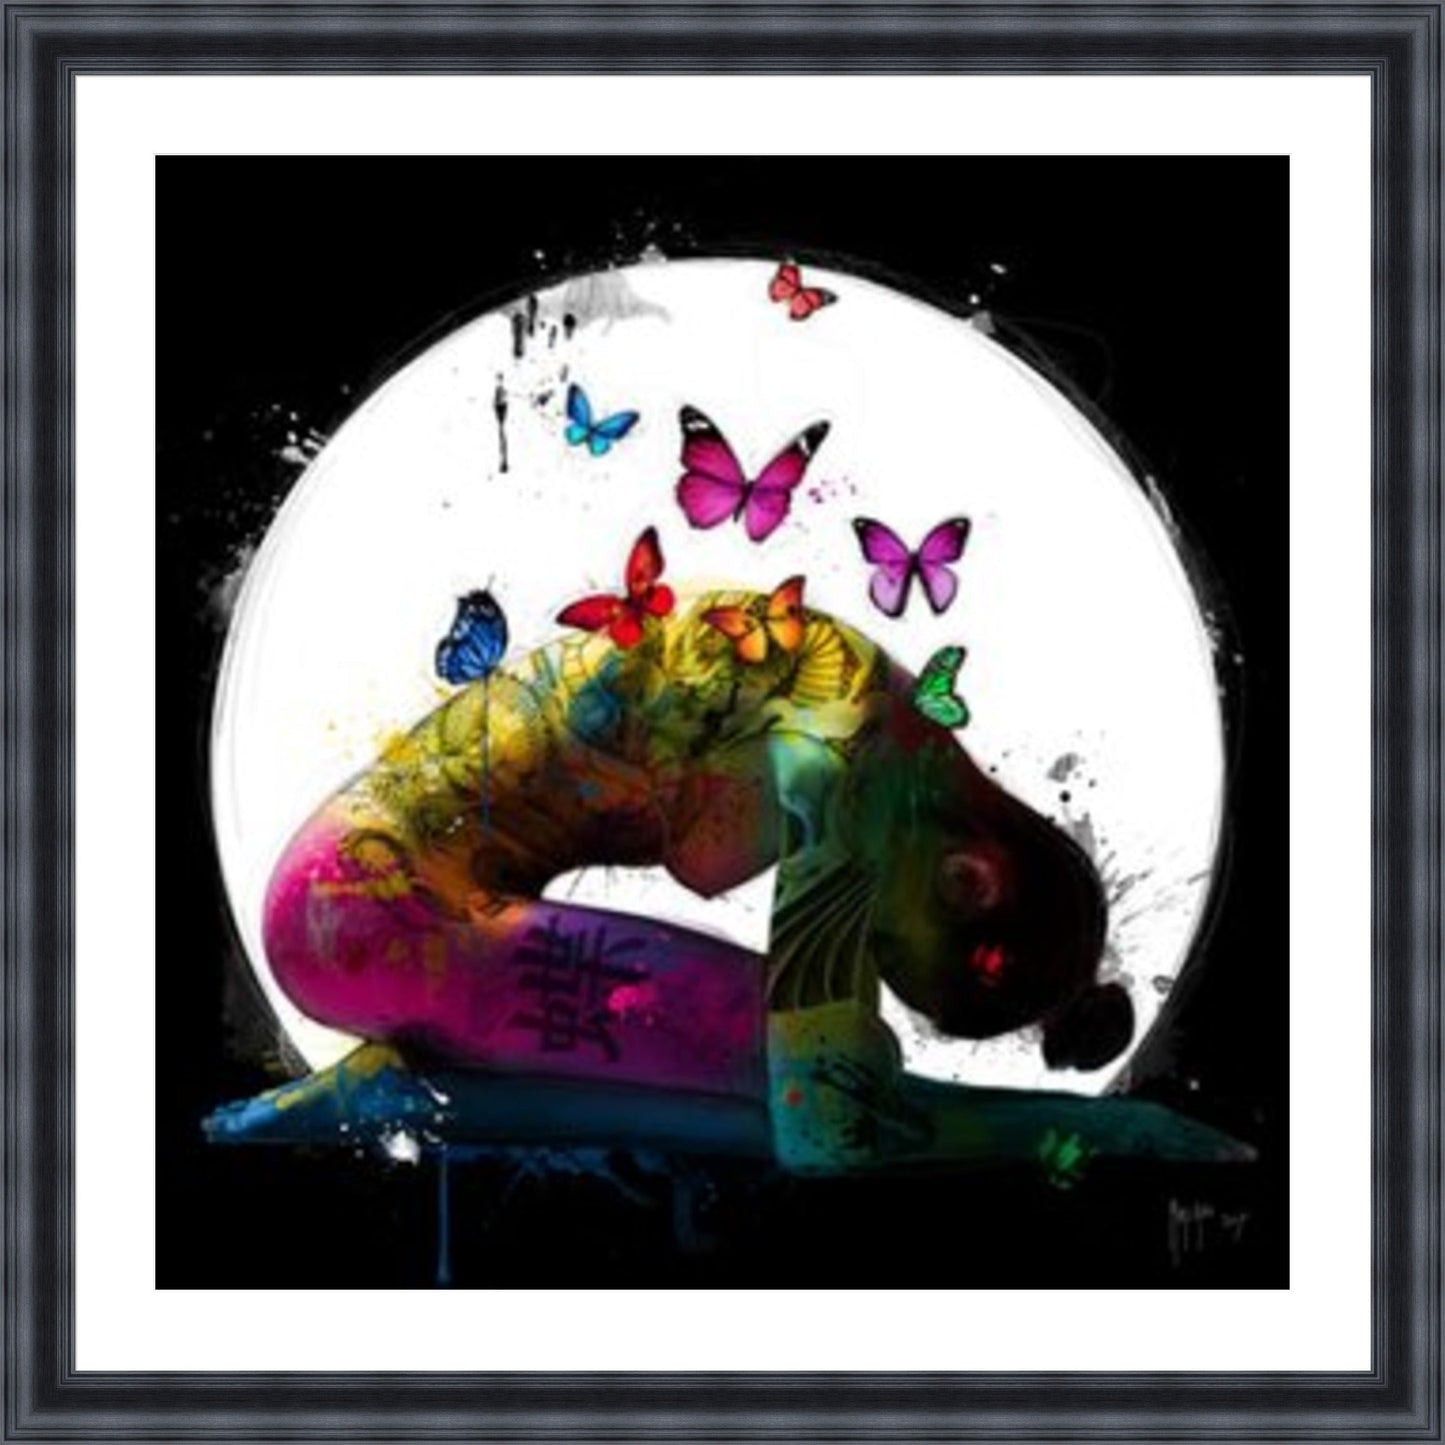 Butterfly Dream by Patrice Murciano